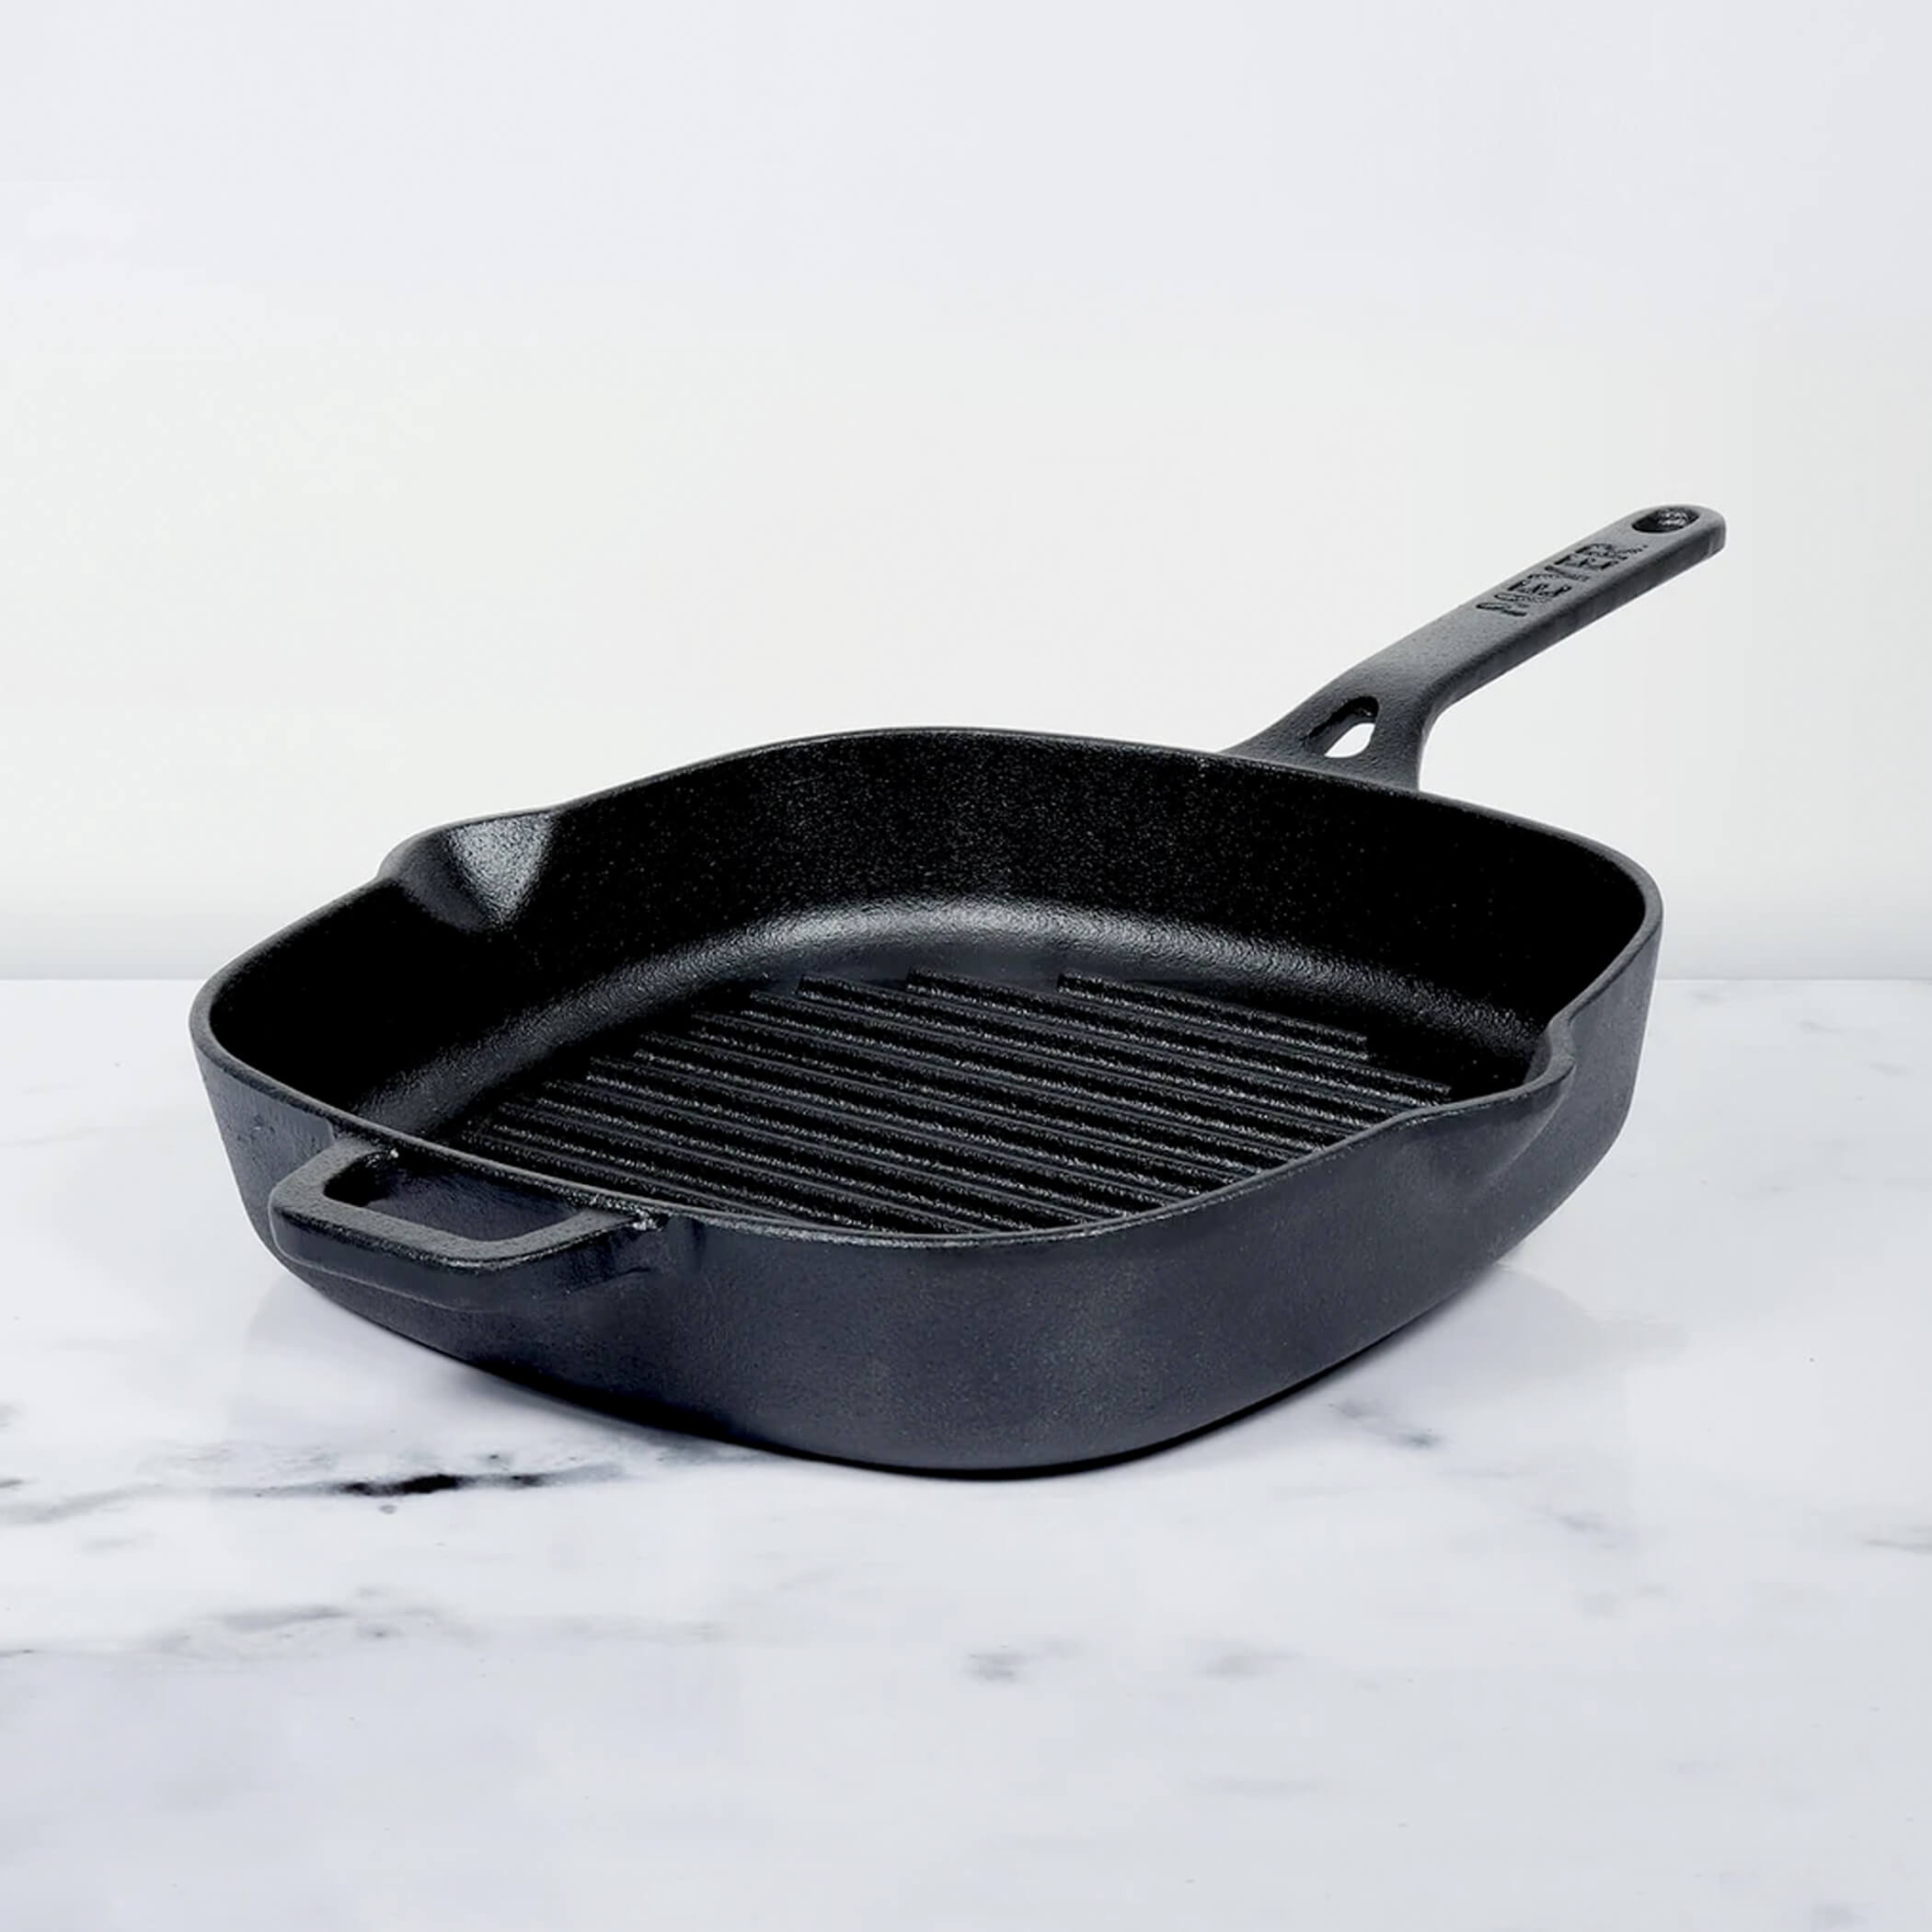 Safe And Sturdy Induction Grill Pan For Indoor Grilling - PotsandPans India